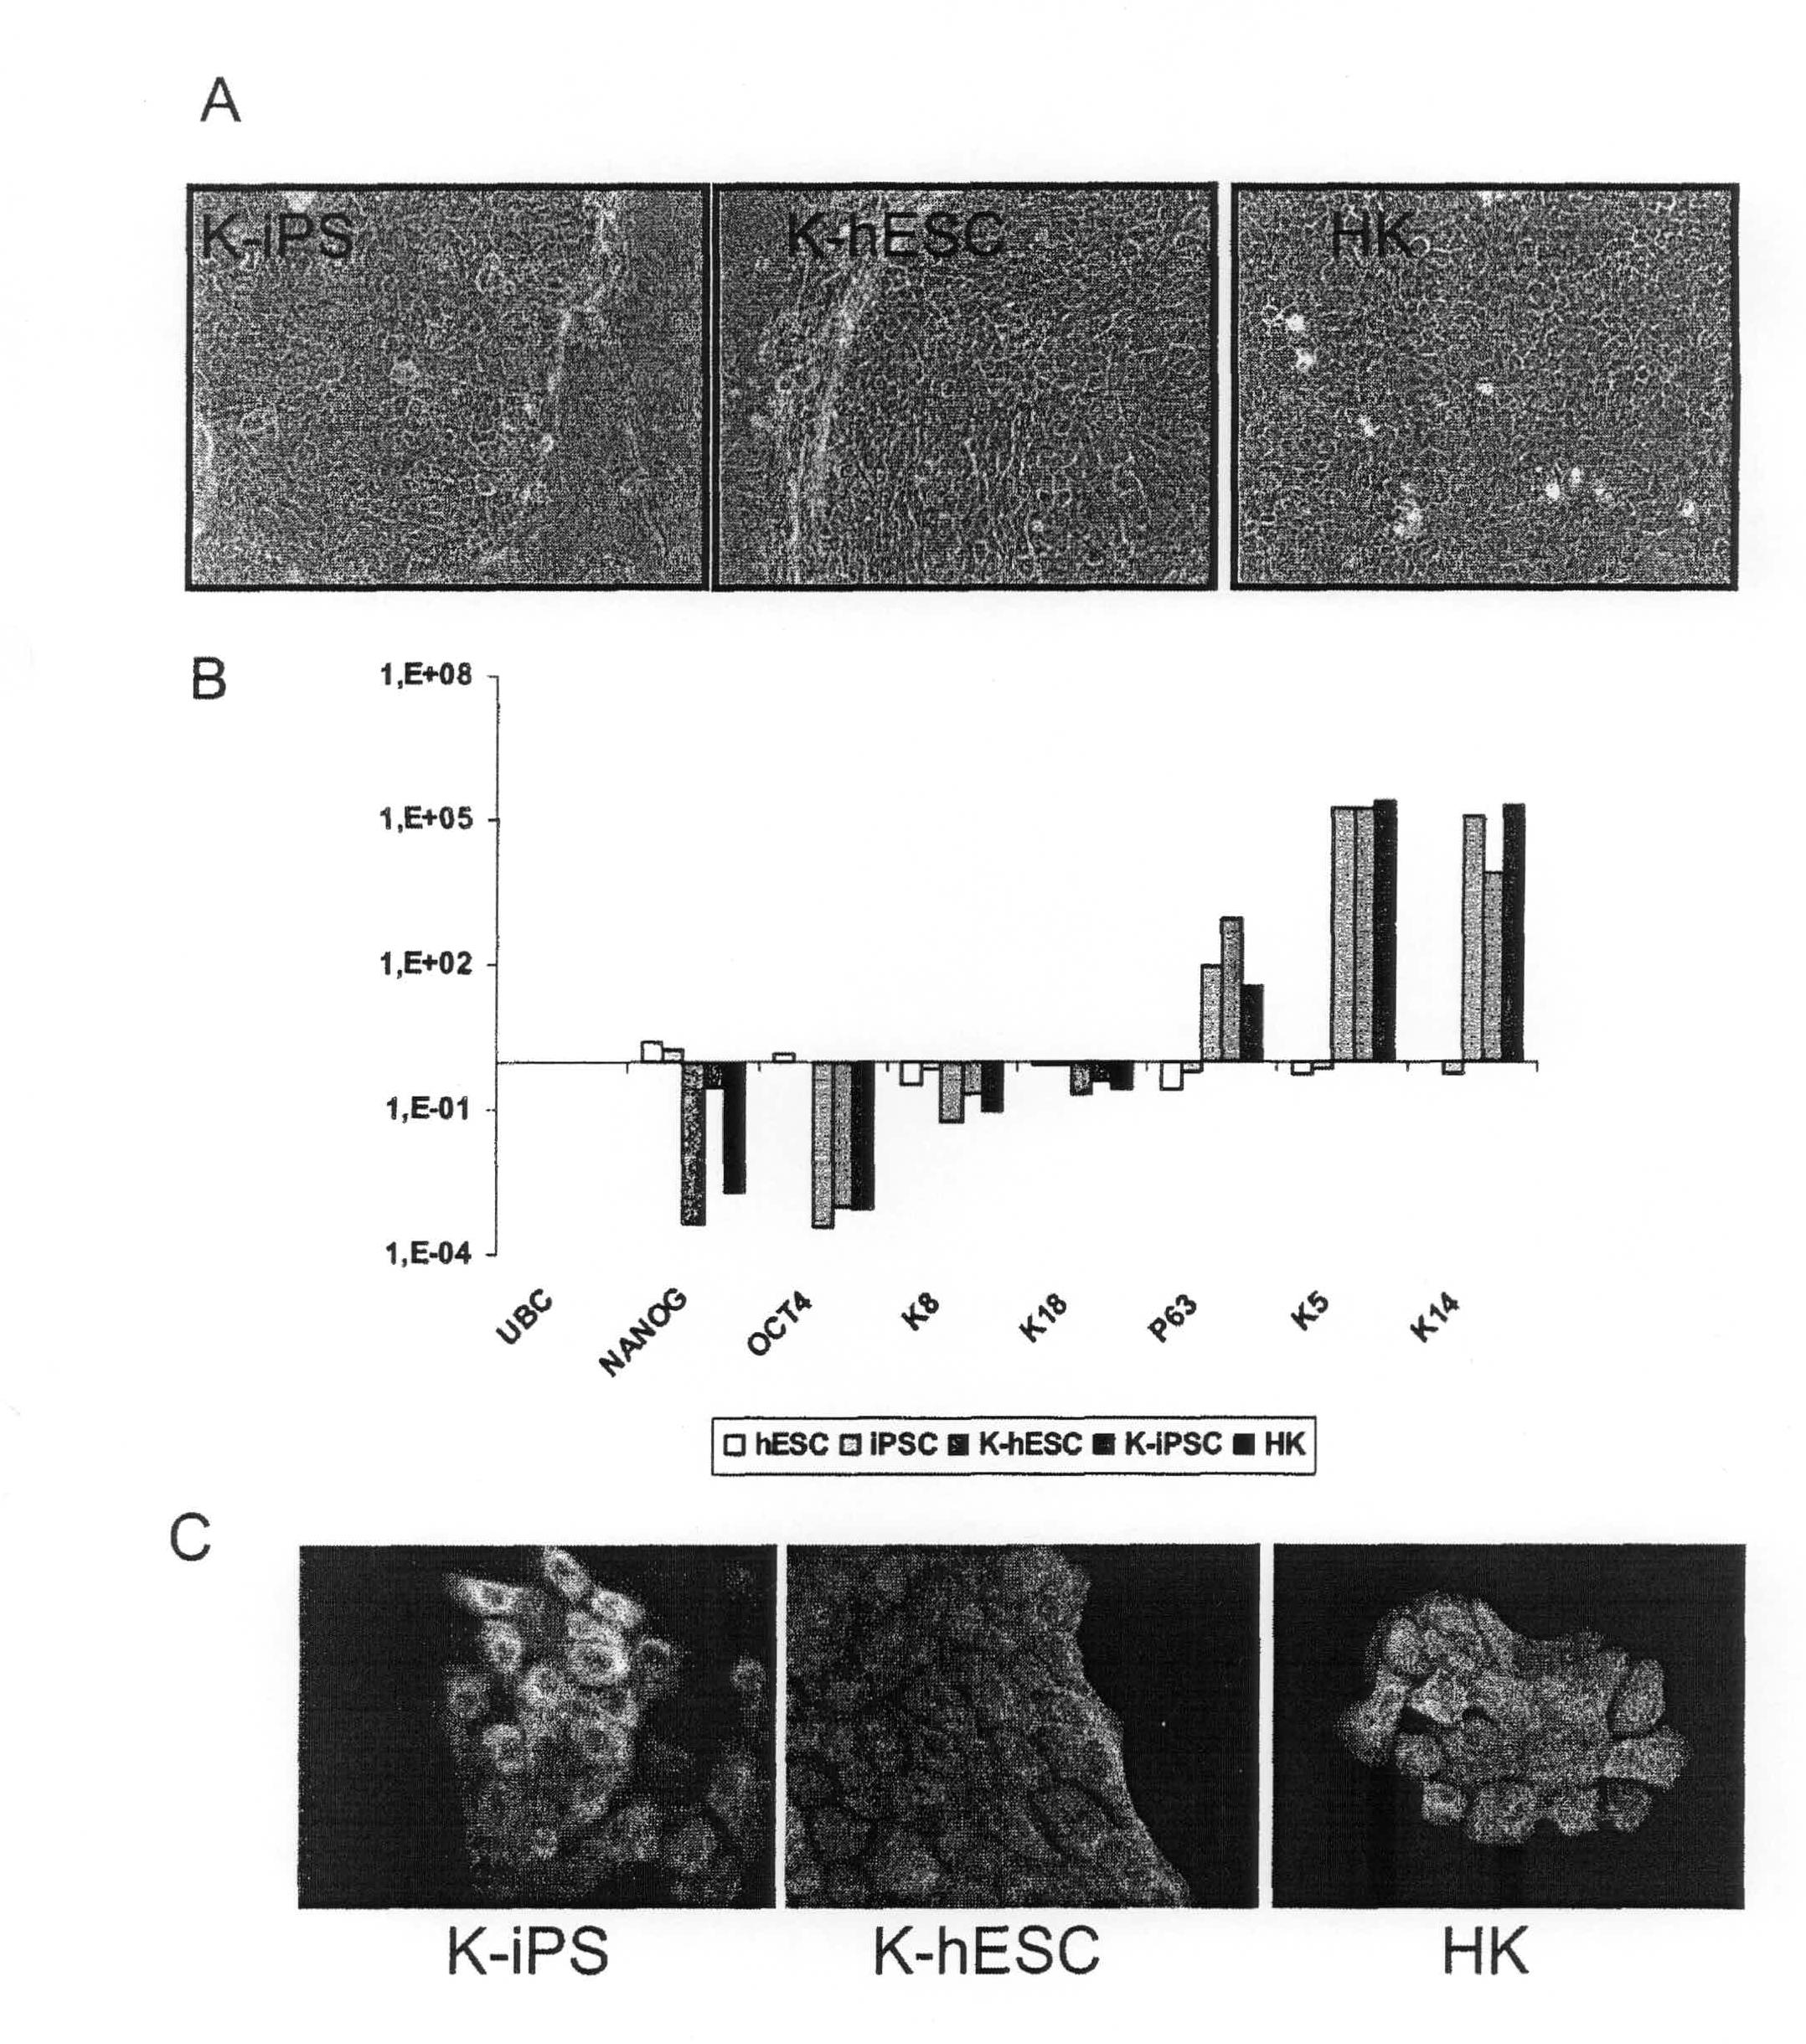 Methods for preparing human skin substitutes from human pluripotent stem cells